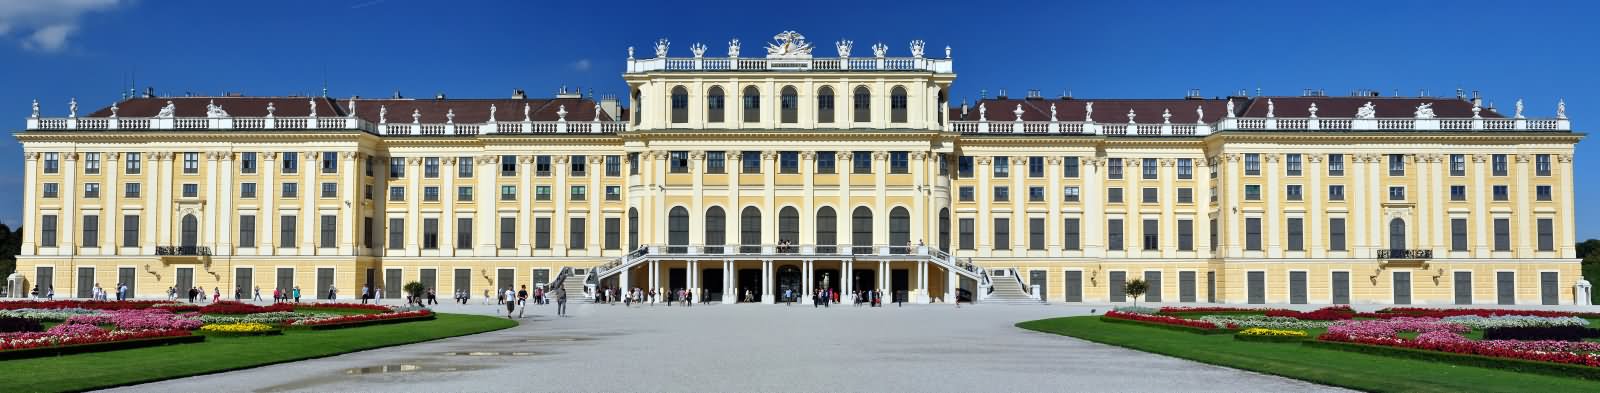 Panorama View Of The Schonbrunn Palace In Austria